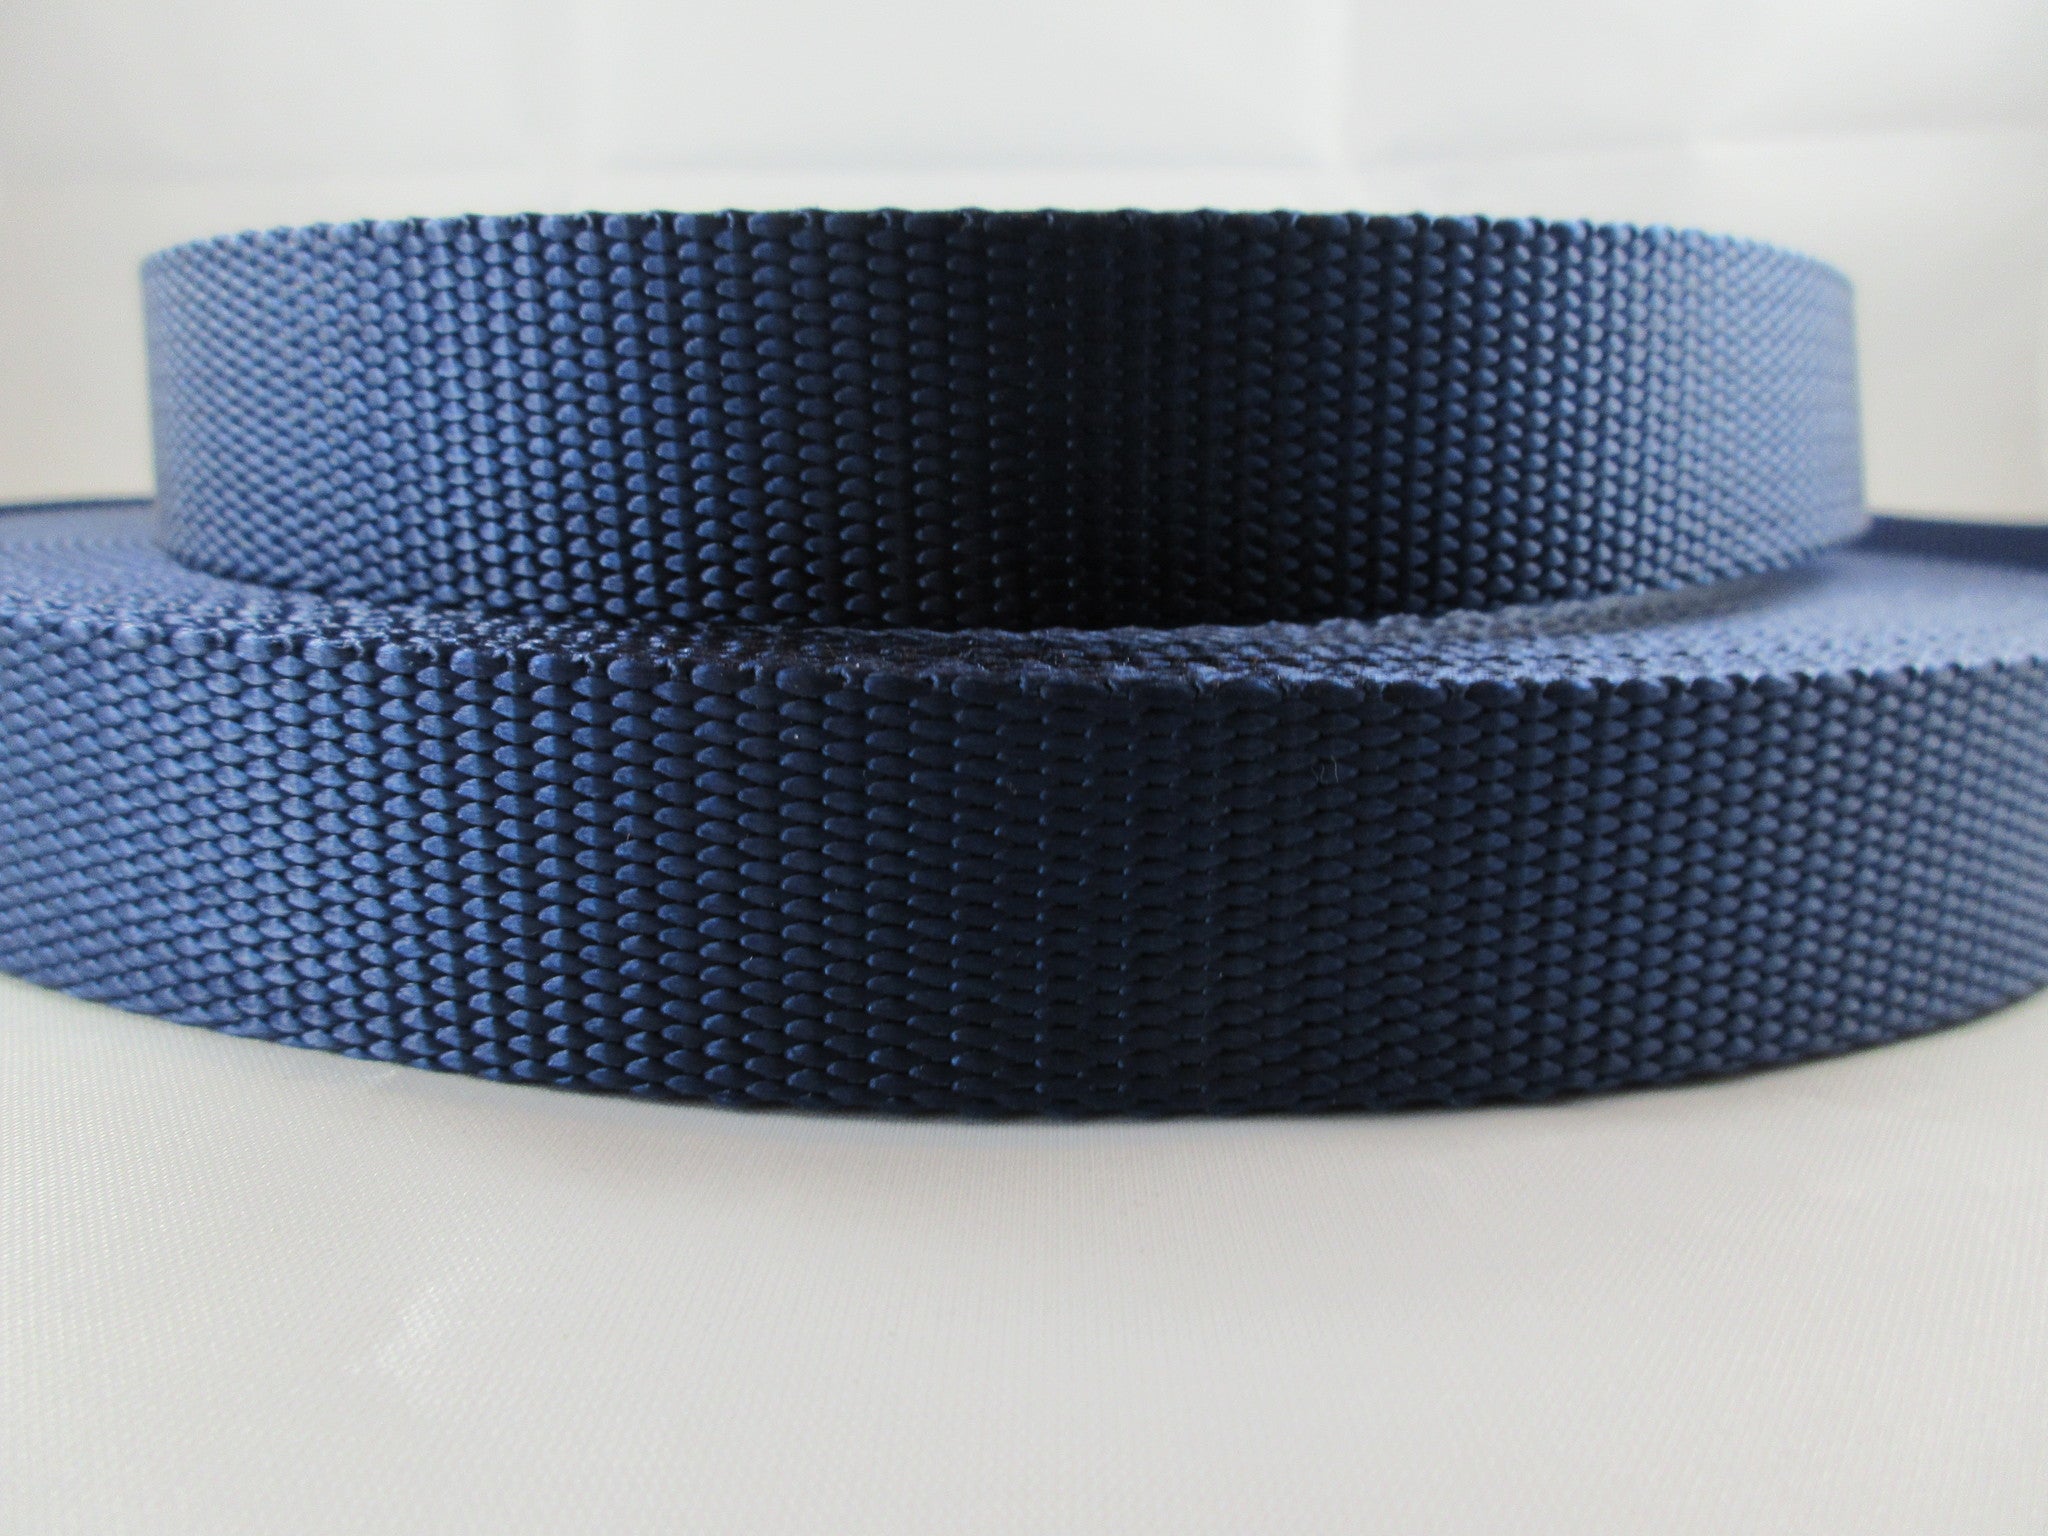 3/4" Navy Blue Nylon Pig Harness - Penny and Hoover's Pig Pen